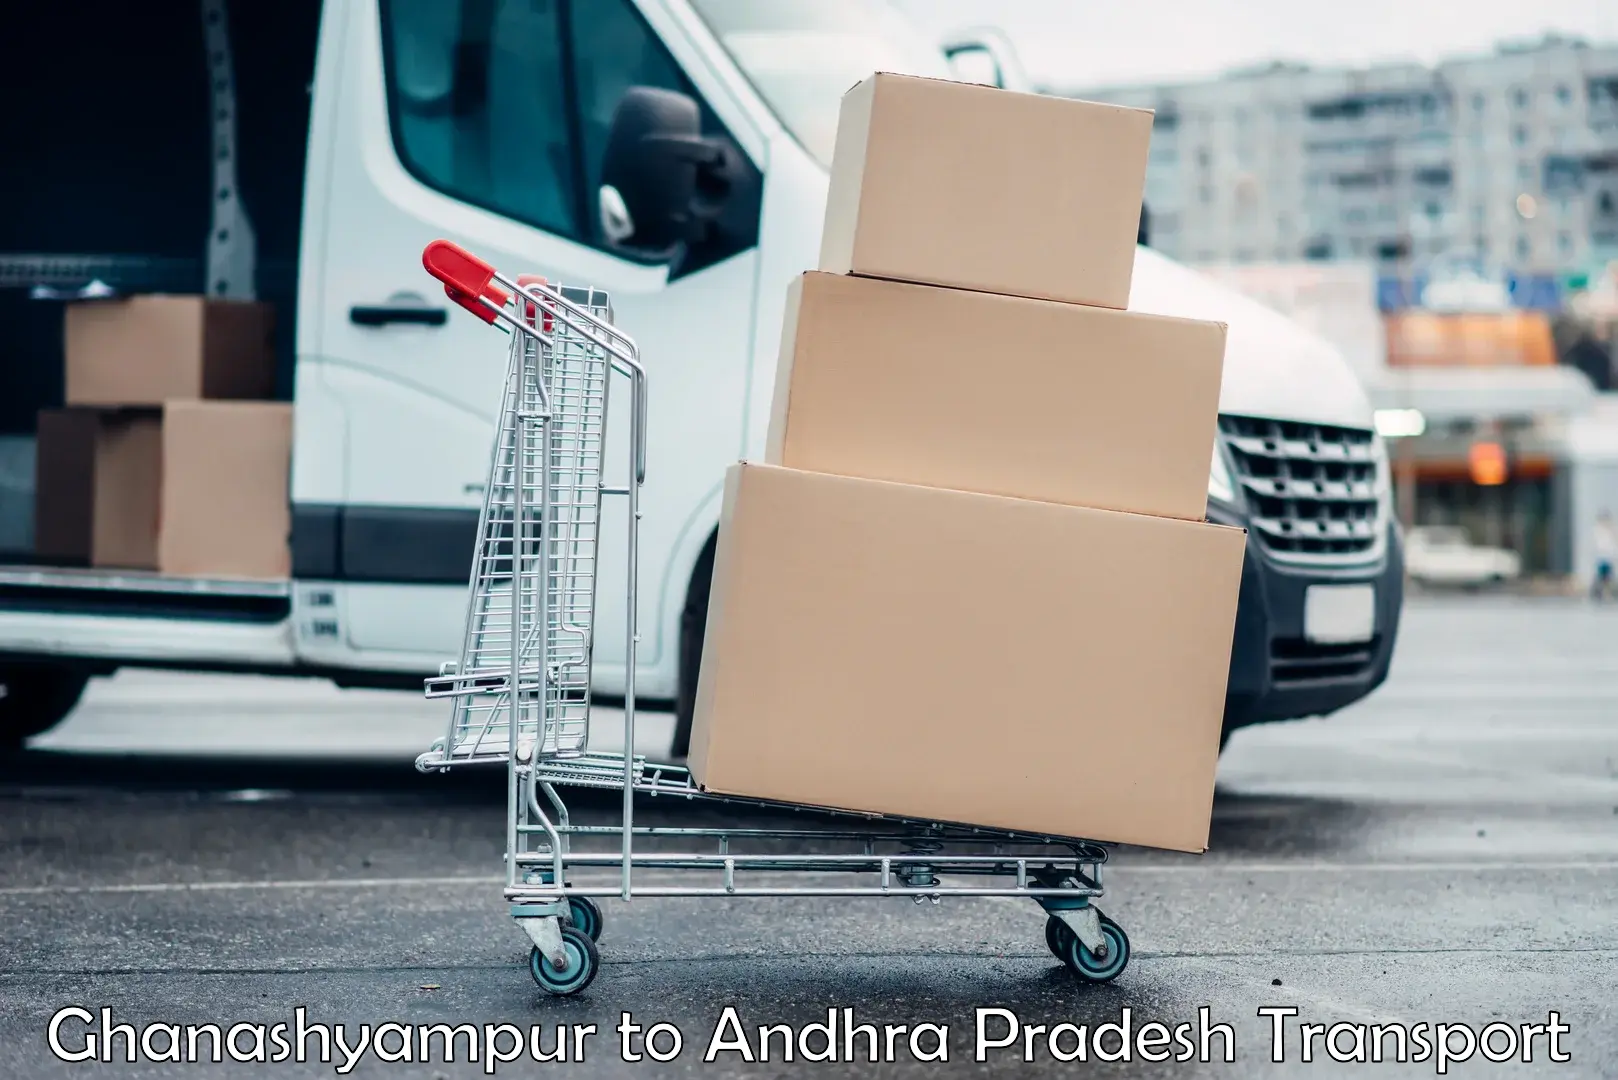 Logistics transportation services Ghanashyampur to Nellore